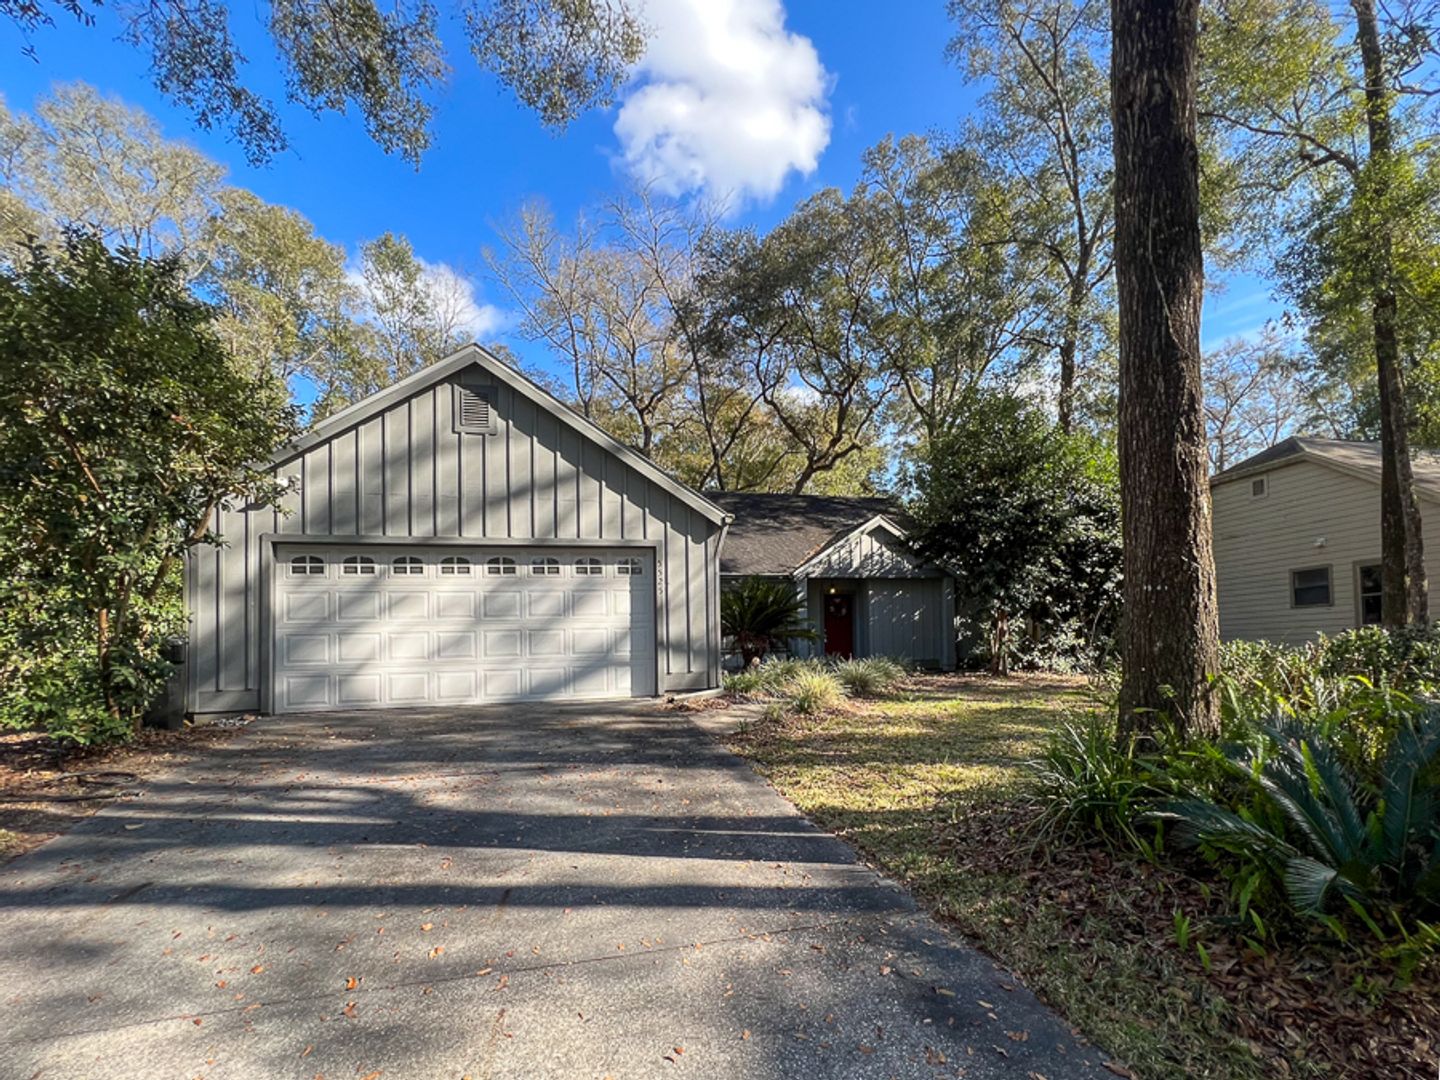 4BR/2BA w/ Flex Space in Haile Plantation - available mid July